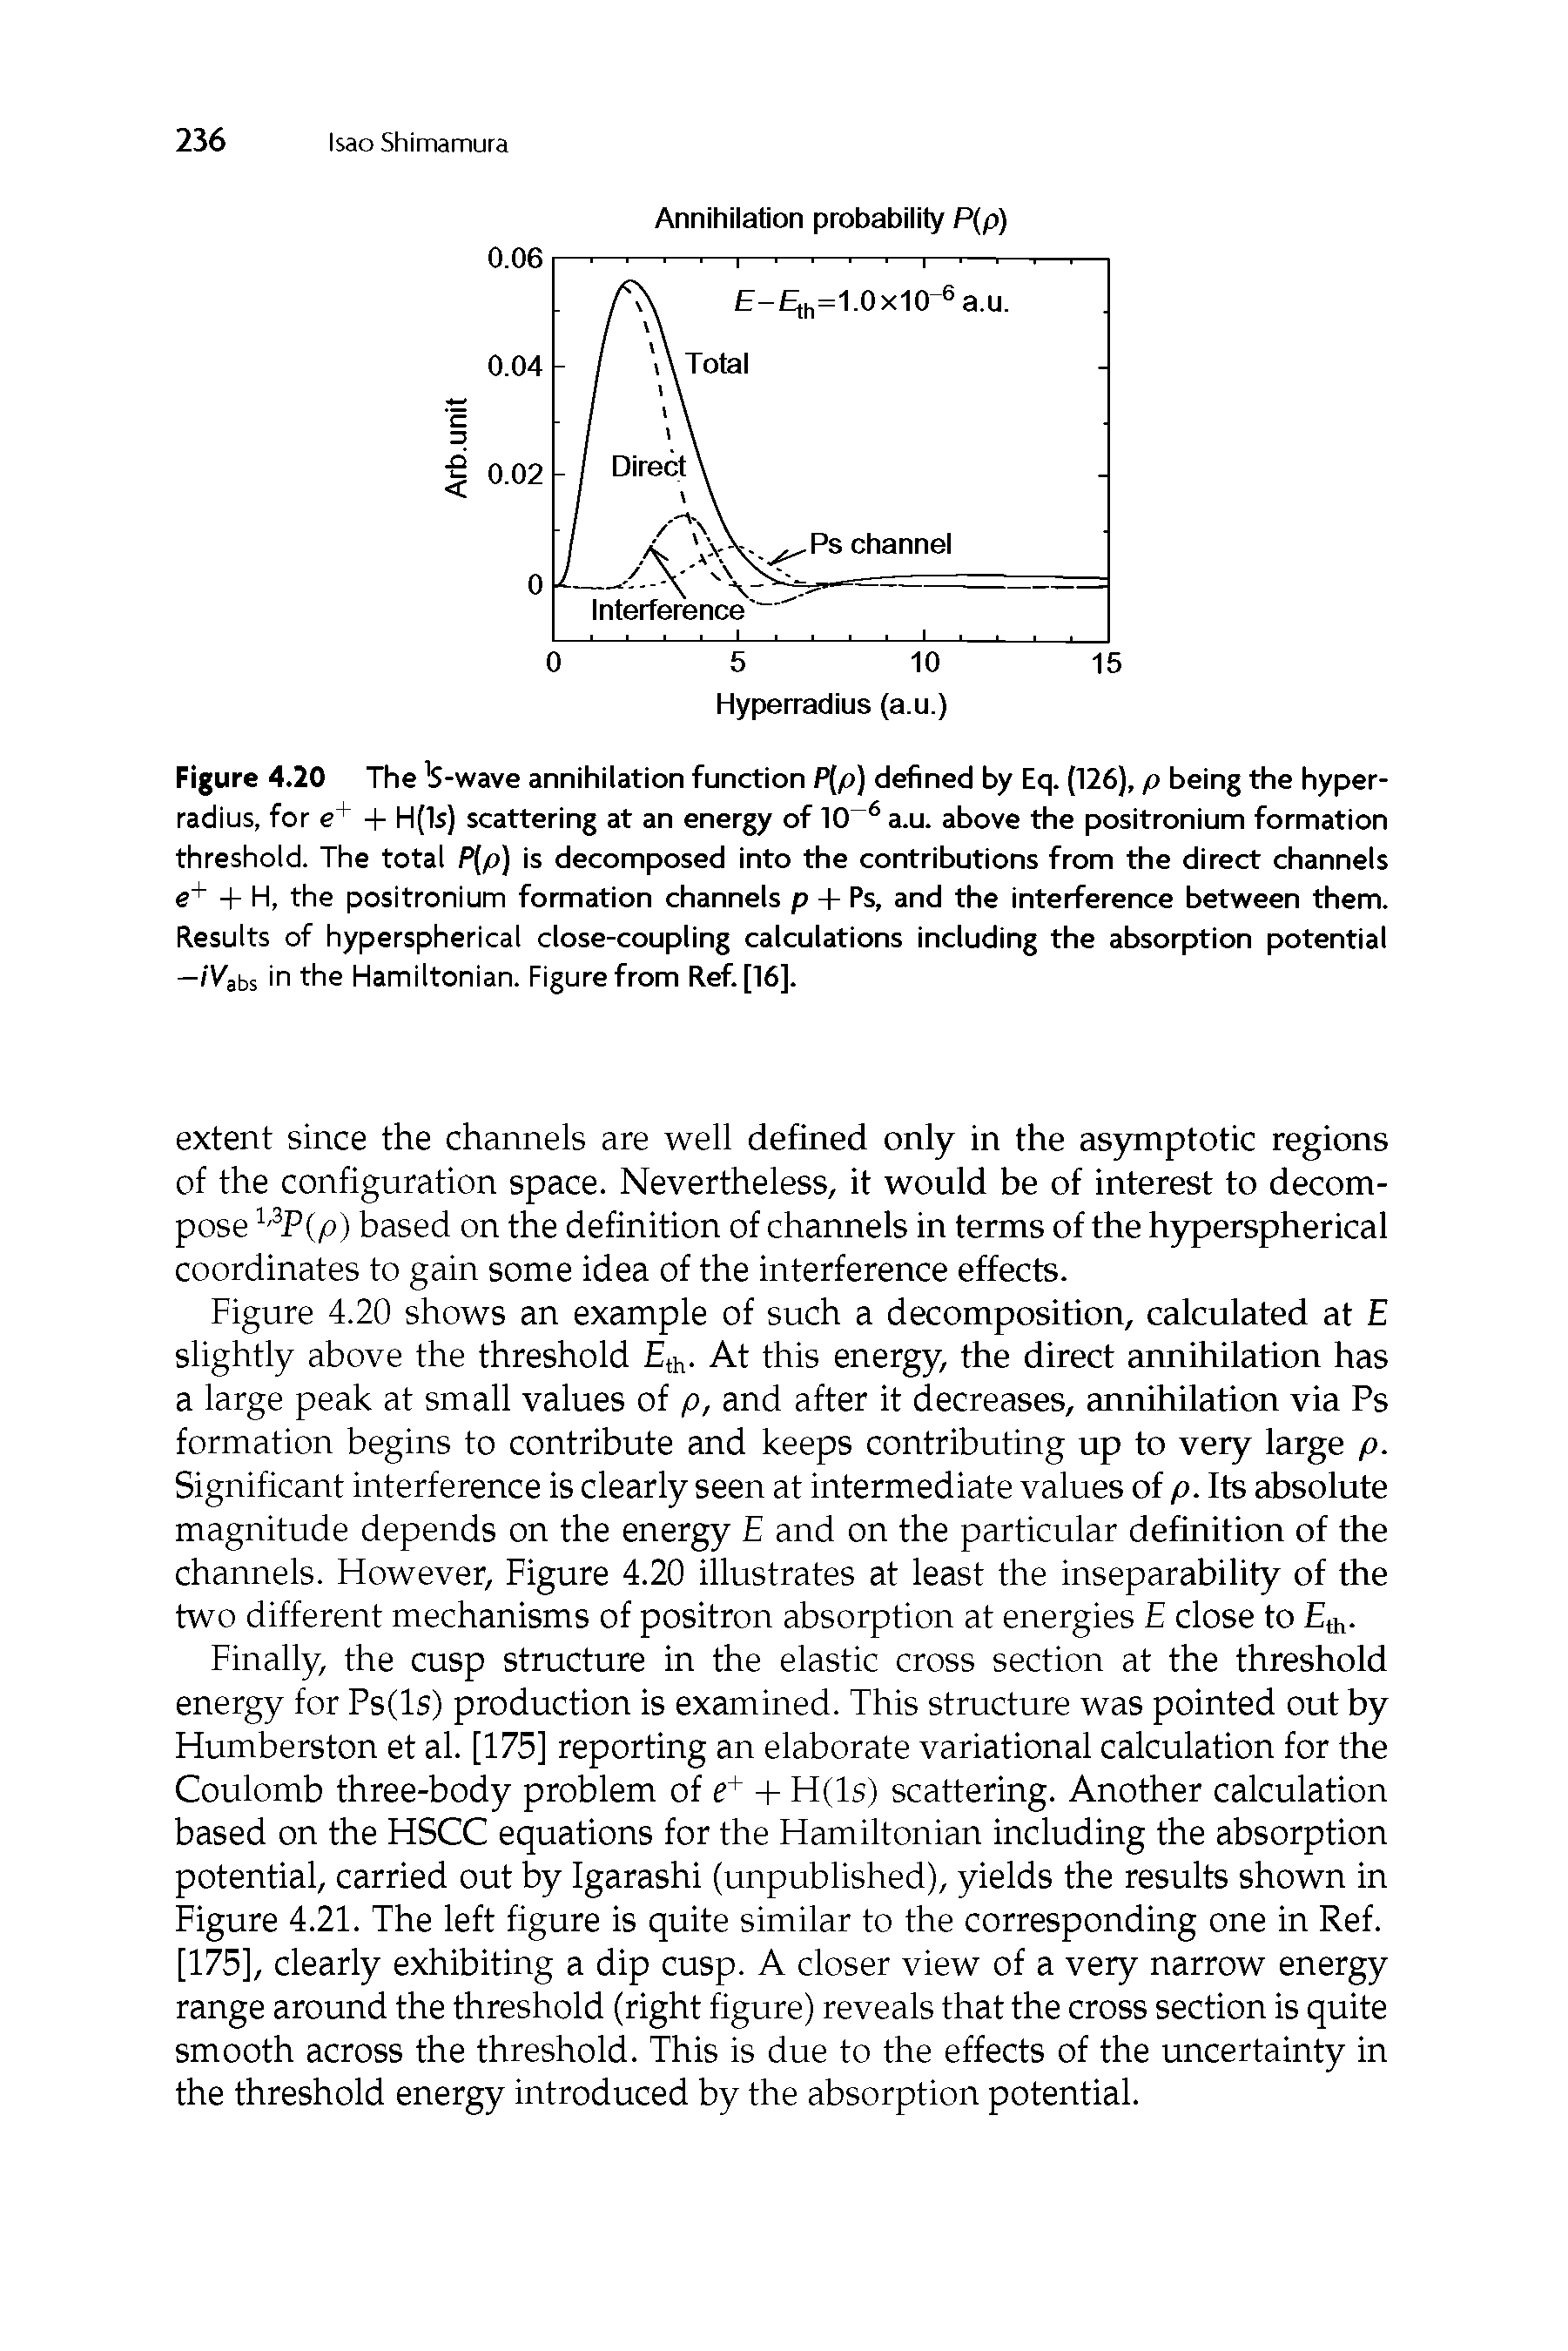 Figure 4.20 The S-wave annihilation function P[p) defined by Eq. (126), p being the hyperradius, for e+ + H(1s) scattering at an energy of 10 6 a.u. above the positronium formation threshold. The total P[p) is decomposed into the contributions from the direct channels e+ + H, the positronium formation channels p + Ps, and the interference between them. Results of hyperspherical close-coupling calculations including the absorption potential —iVabs in the Hamiltonian. Figure from Ref. [16].